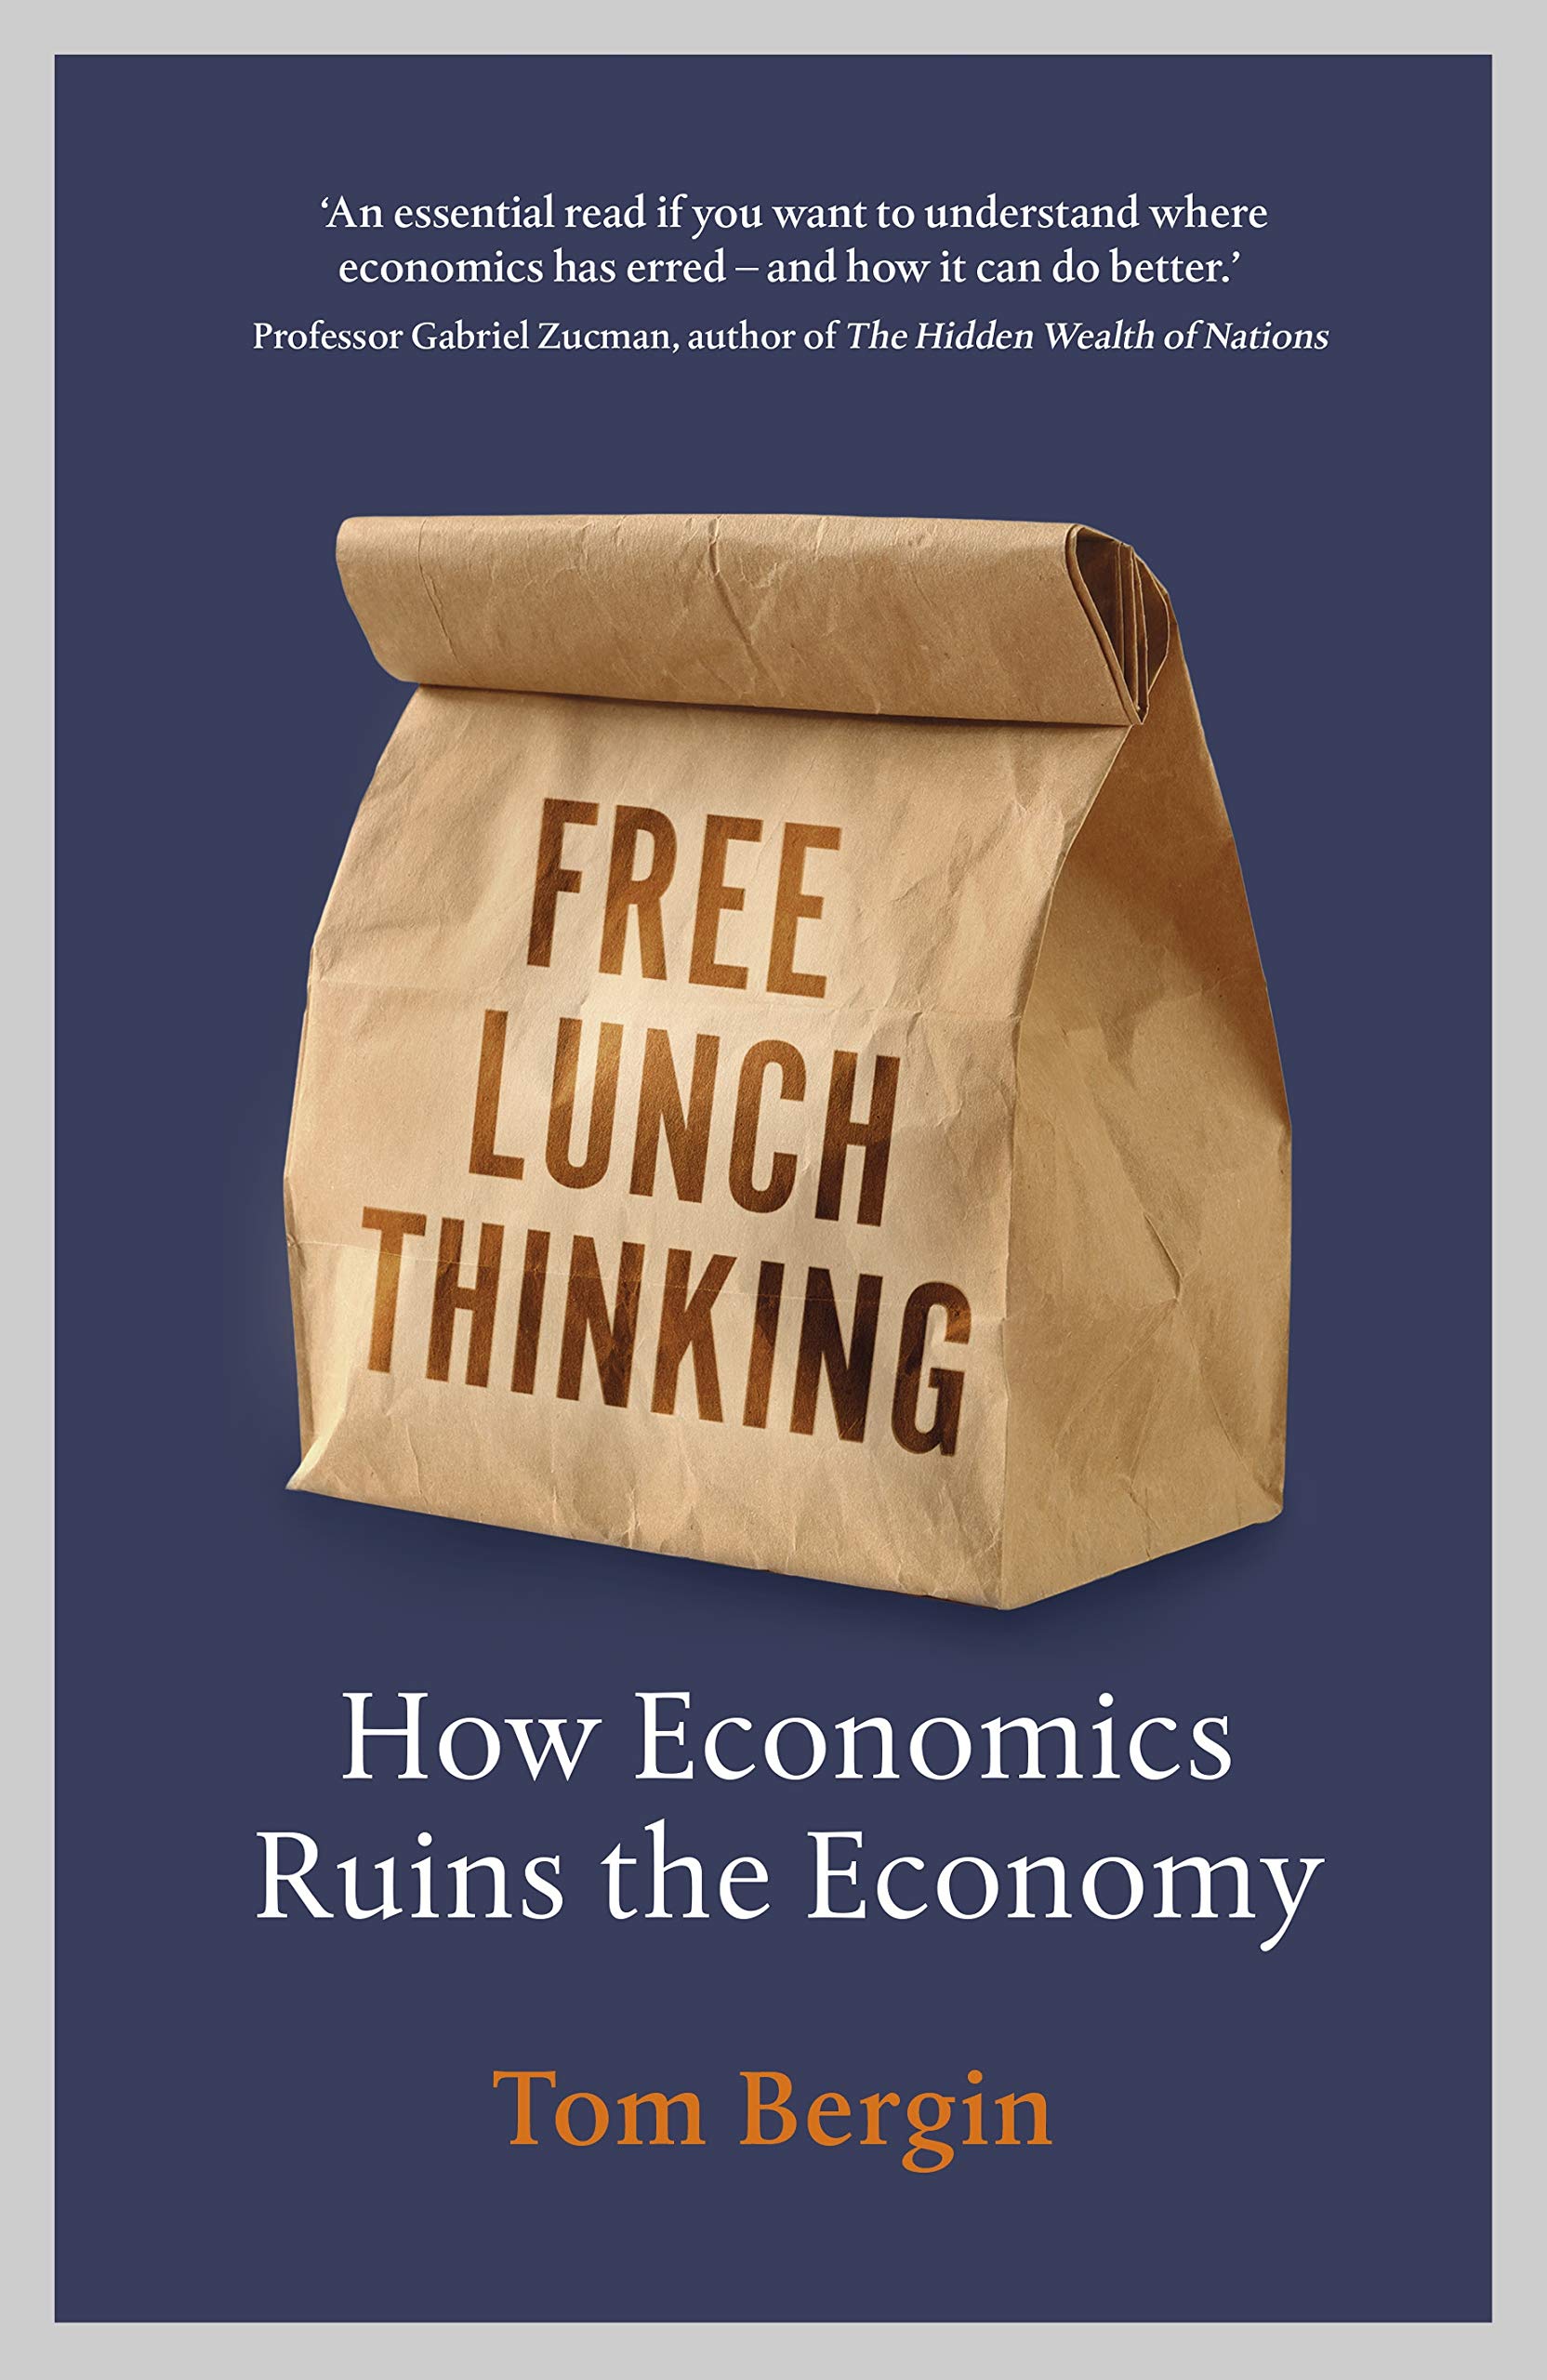 Free Lunch Thinking: How Economics Ruins the Economy by Tom Bergin.